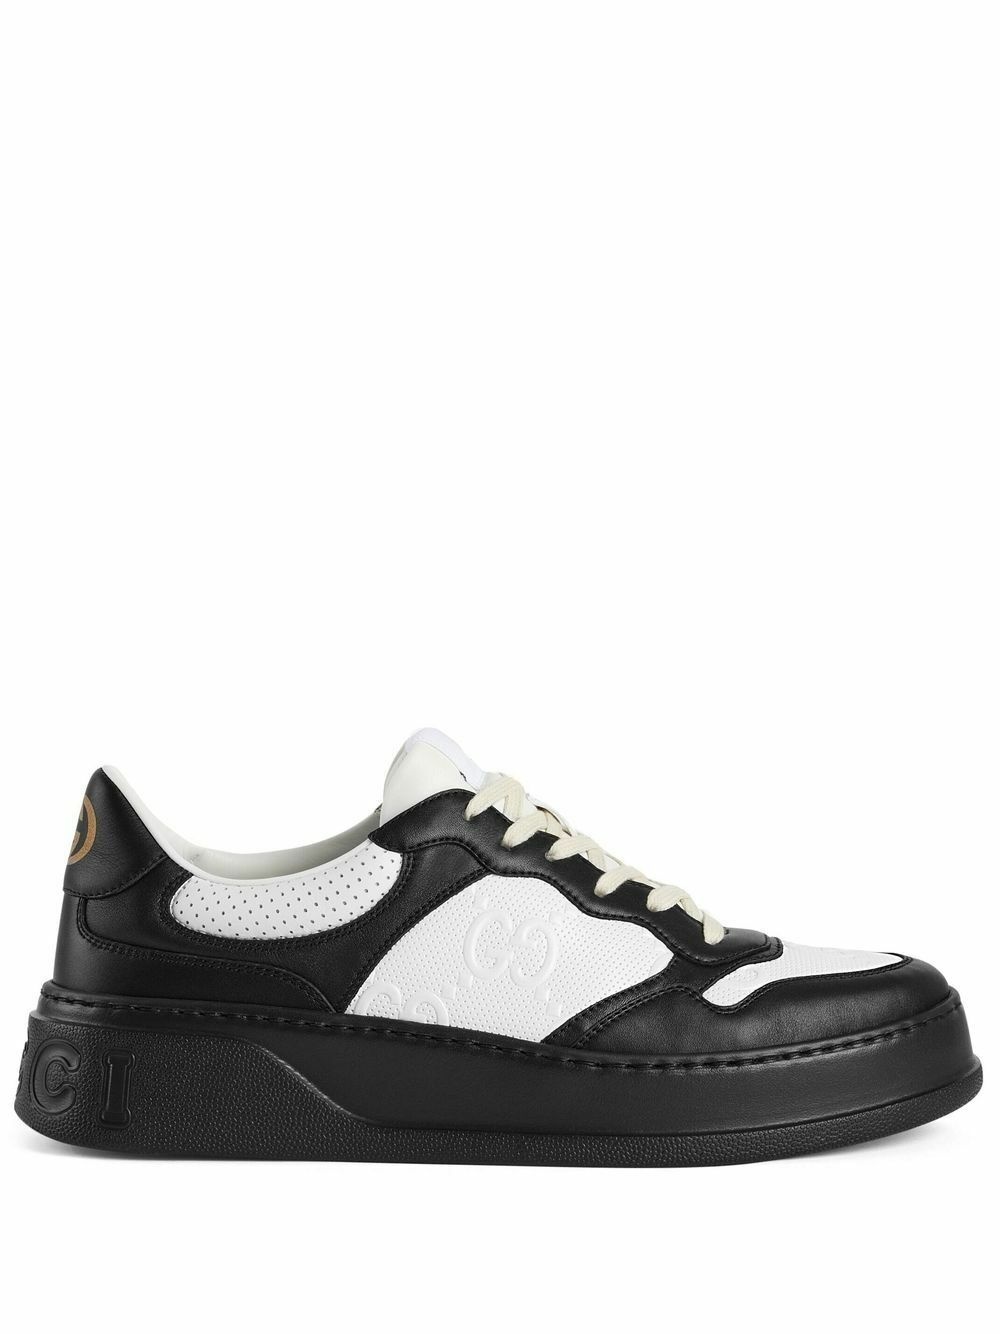 GUCCI - Leather Sneakers Gucci